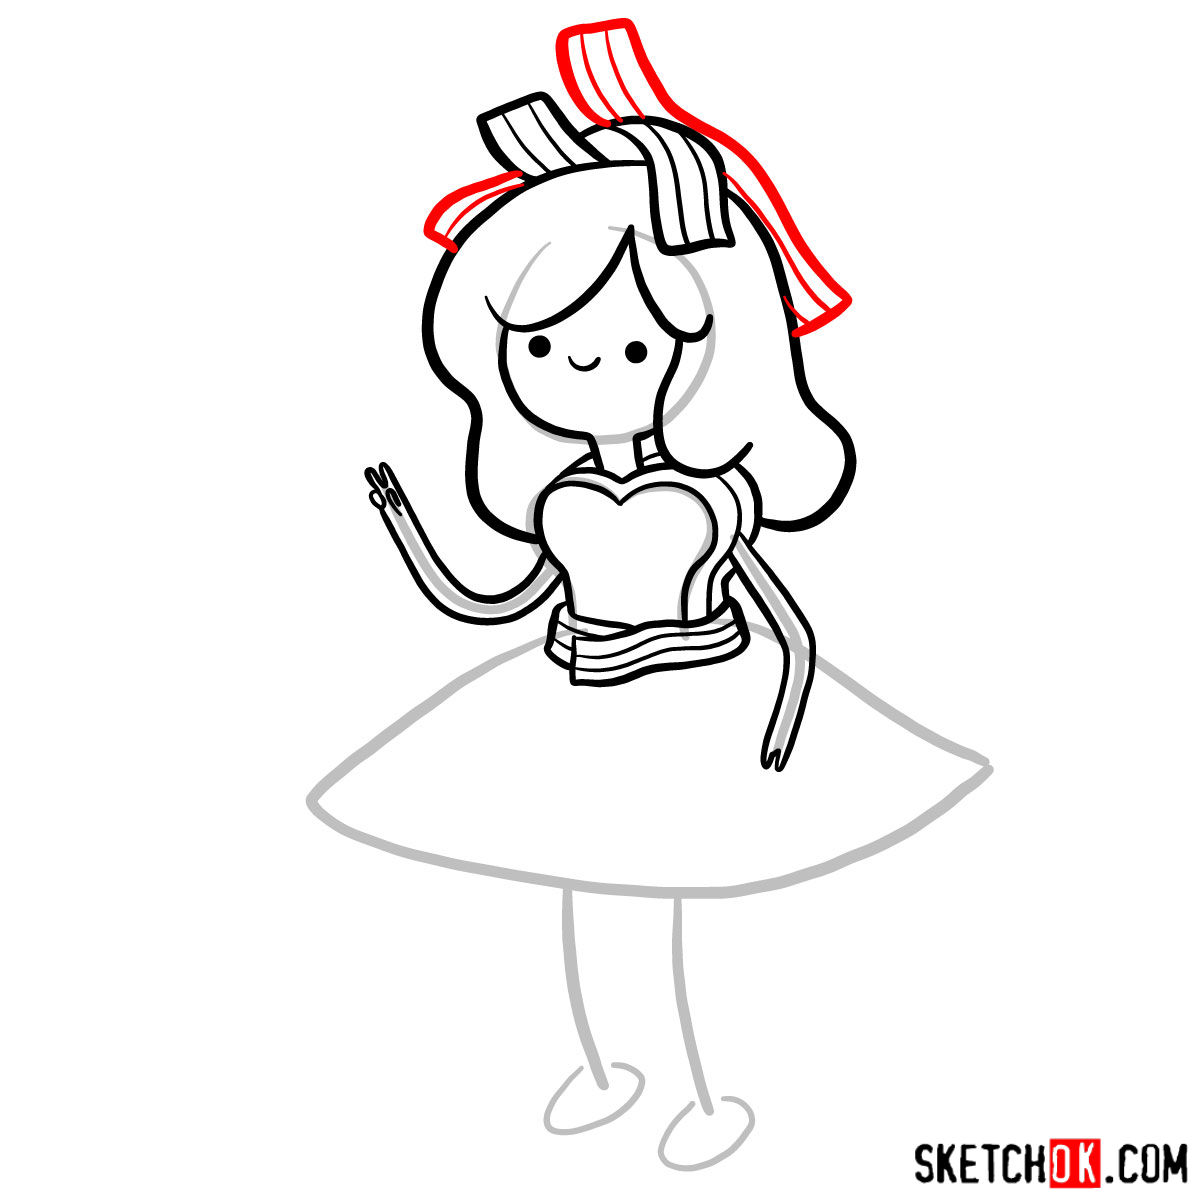 How to draw Breakfast Princess from Adventure Time - step 09